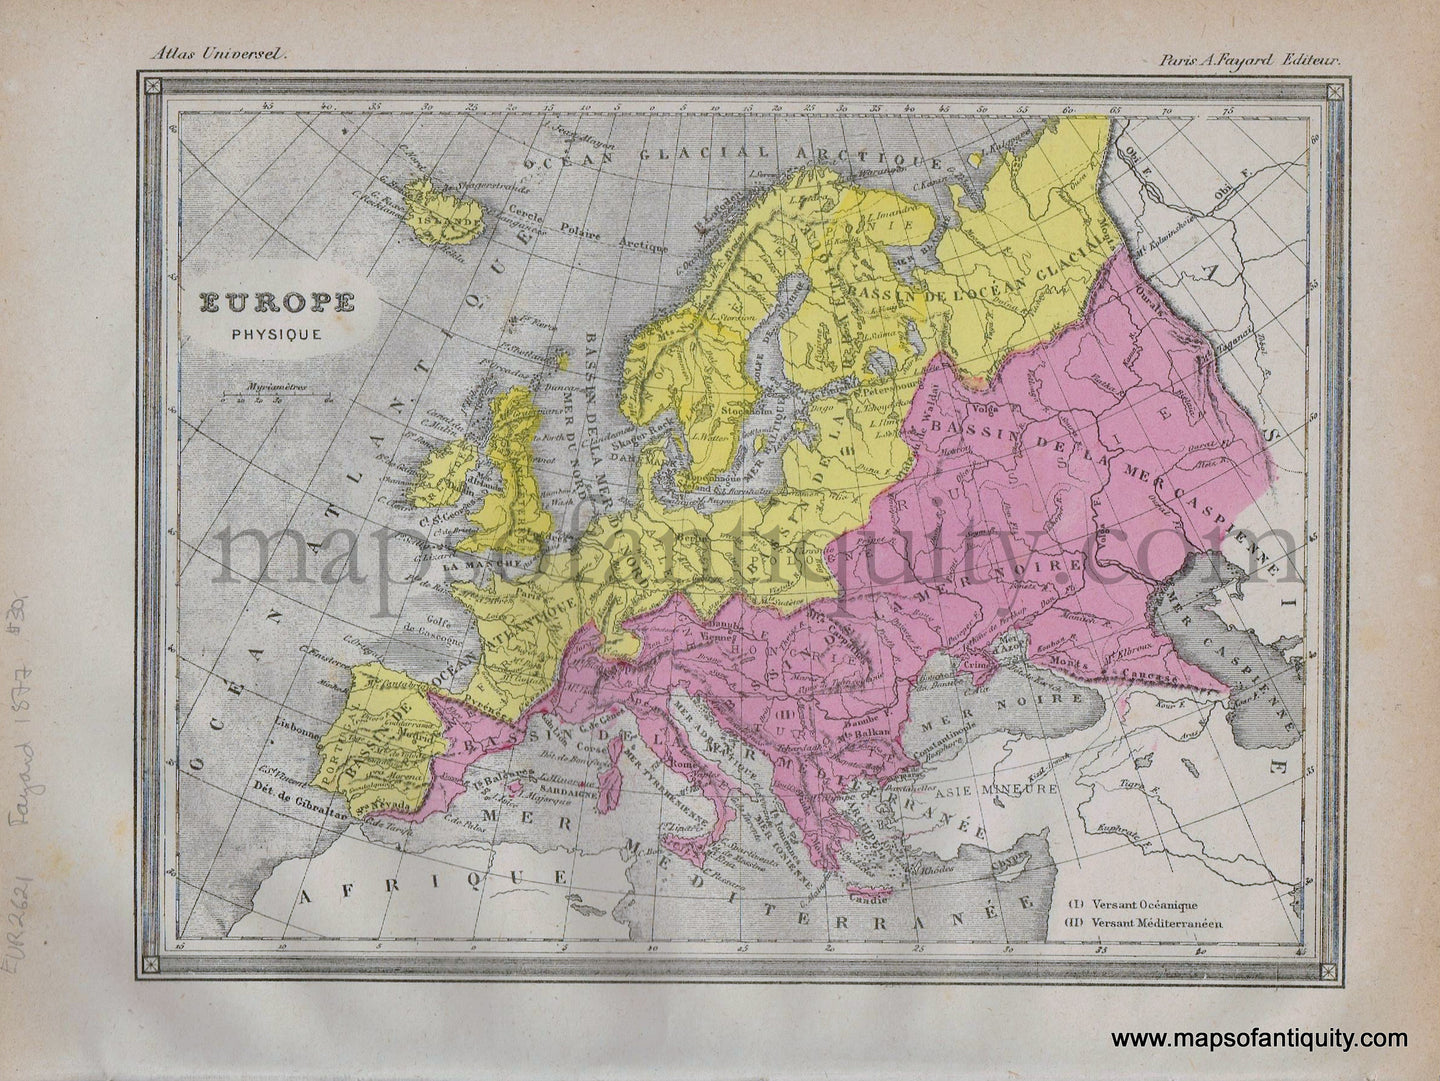 Antique-Printed-Color-Map-Europe-Europe-Physique-1877-Fayard--1800s-19th-century-Maps-of-Antiquity